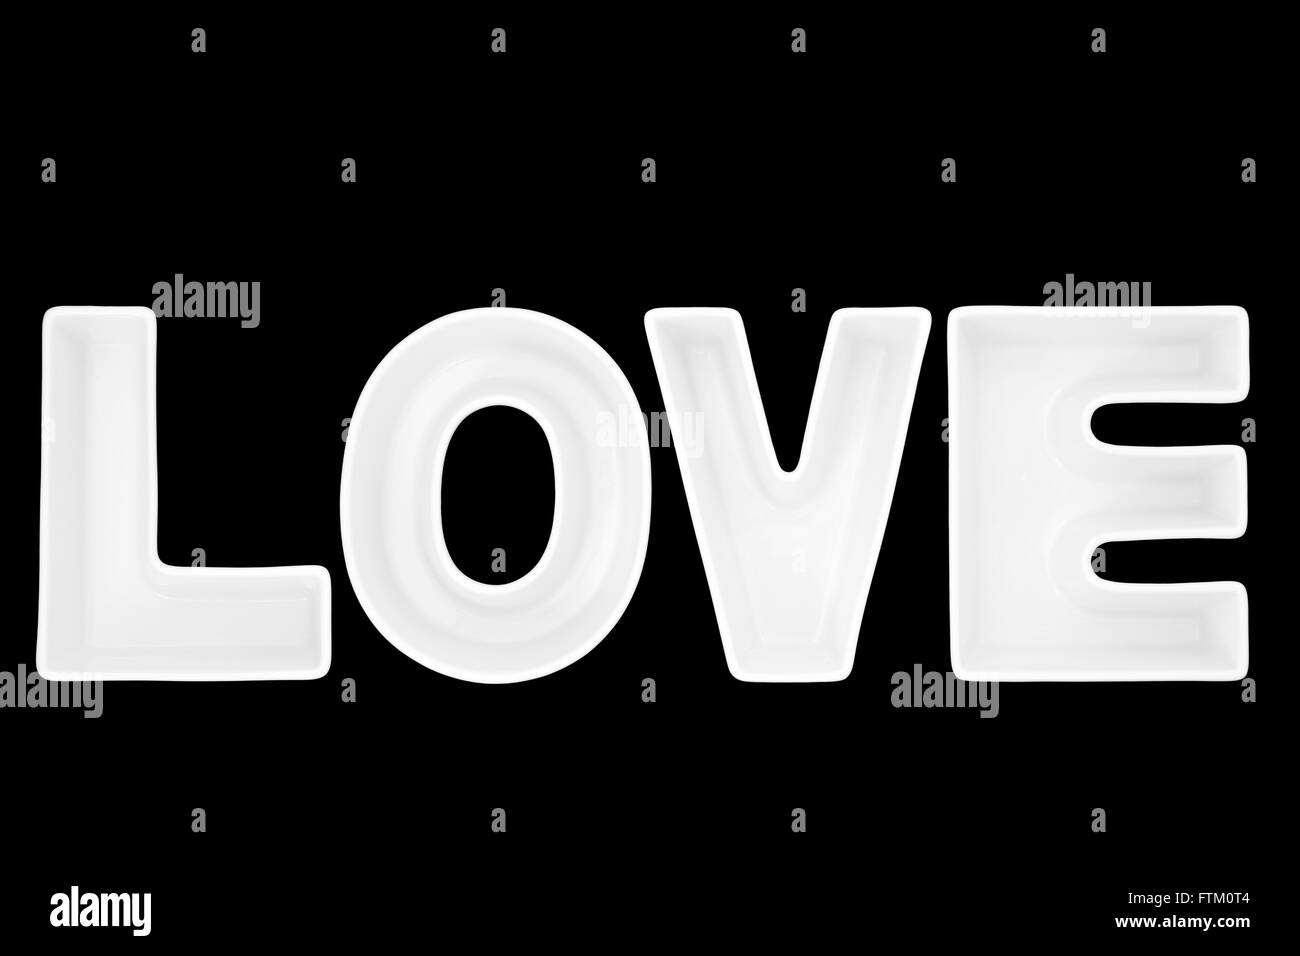 Love letter Black and White Stock Photos & Images - Alamy